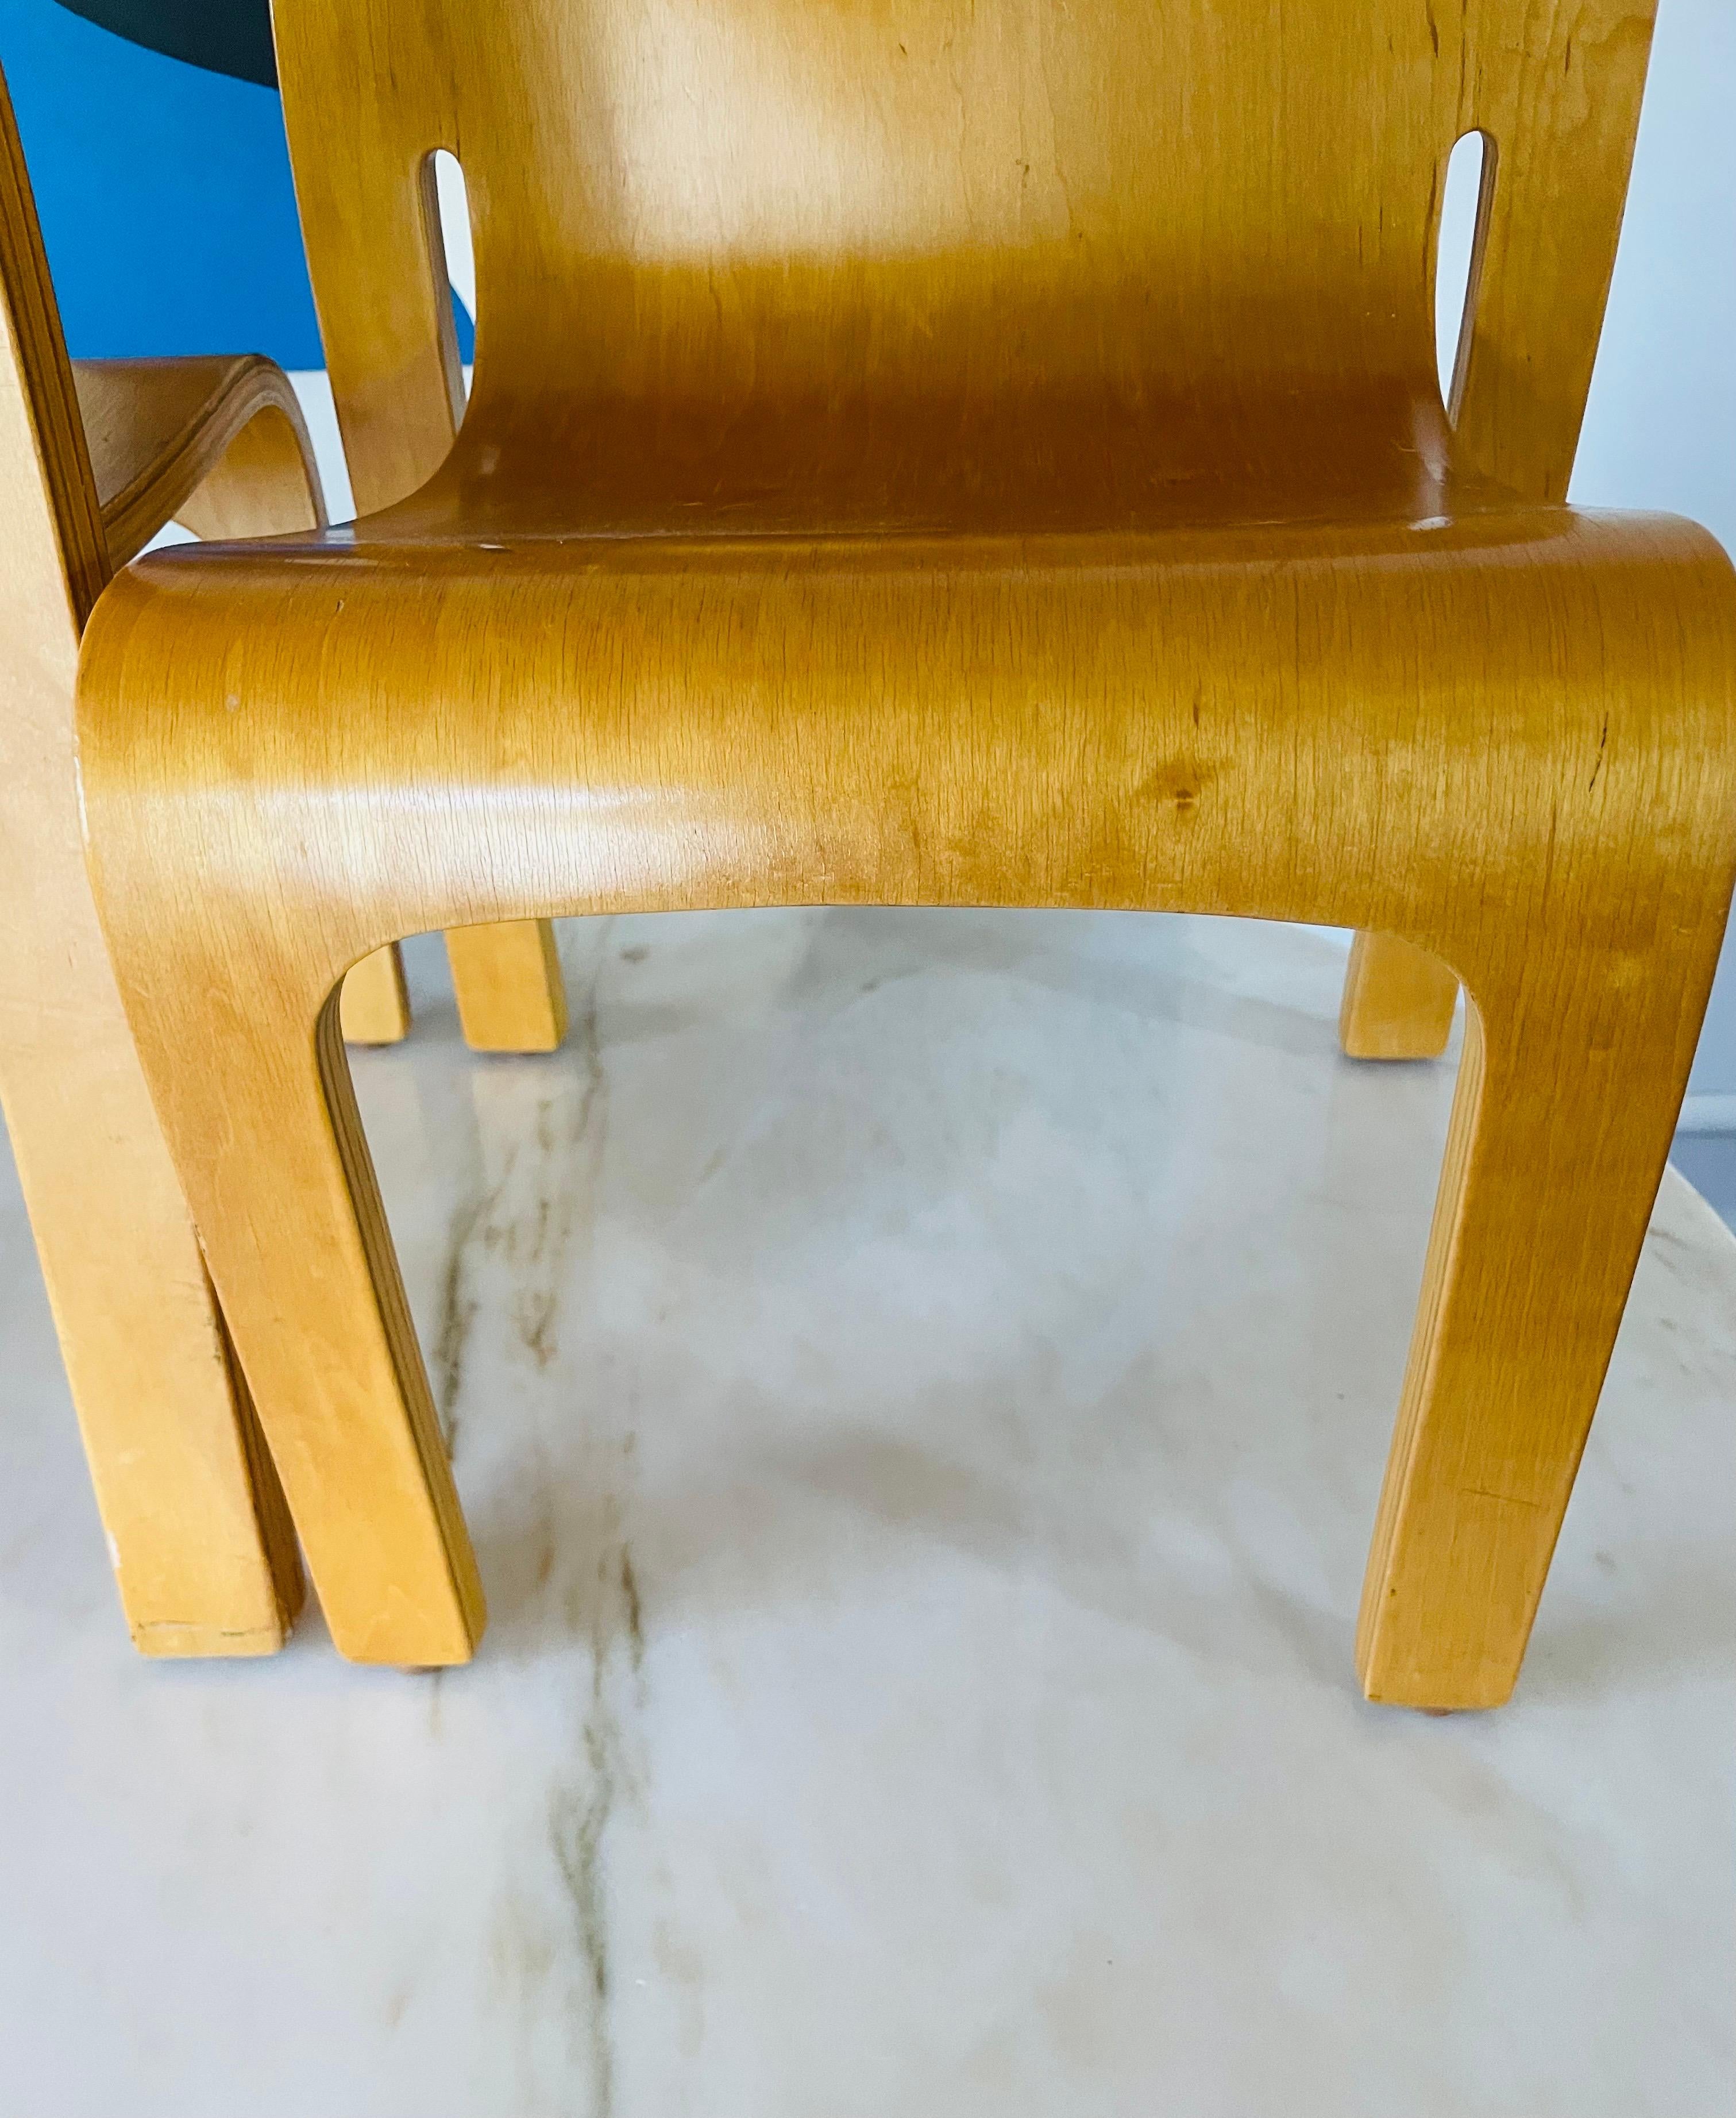 Children's Bodyform Chairs by Peter Danko, 1980s, American For Sale 1